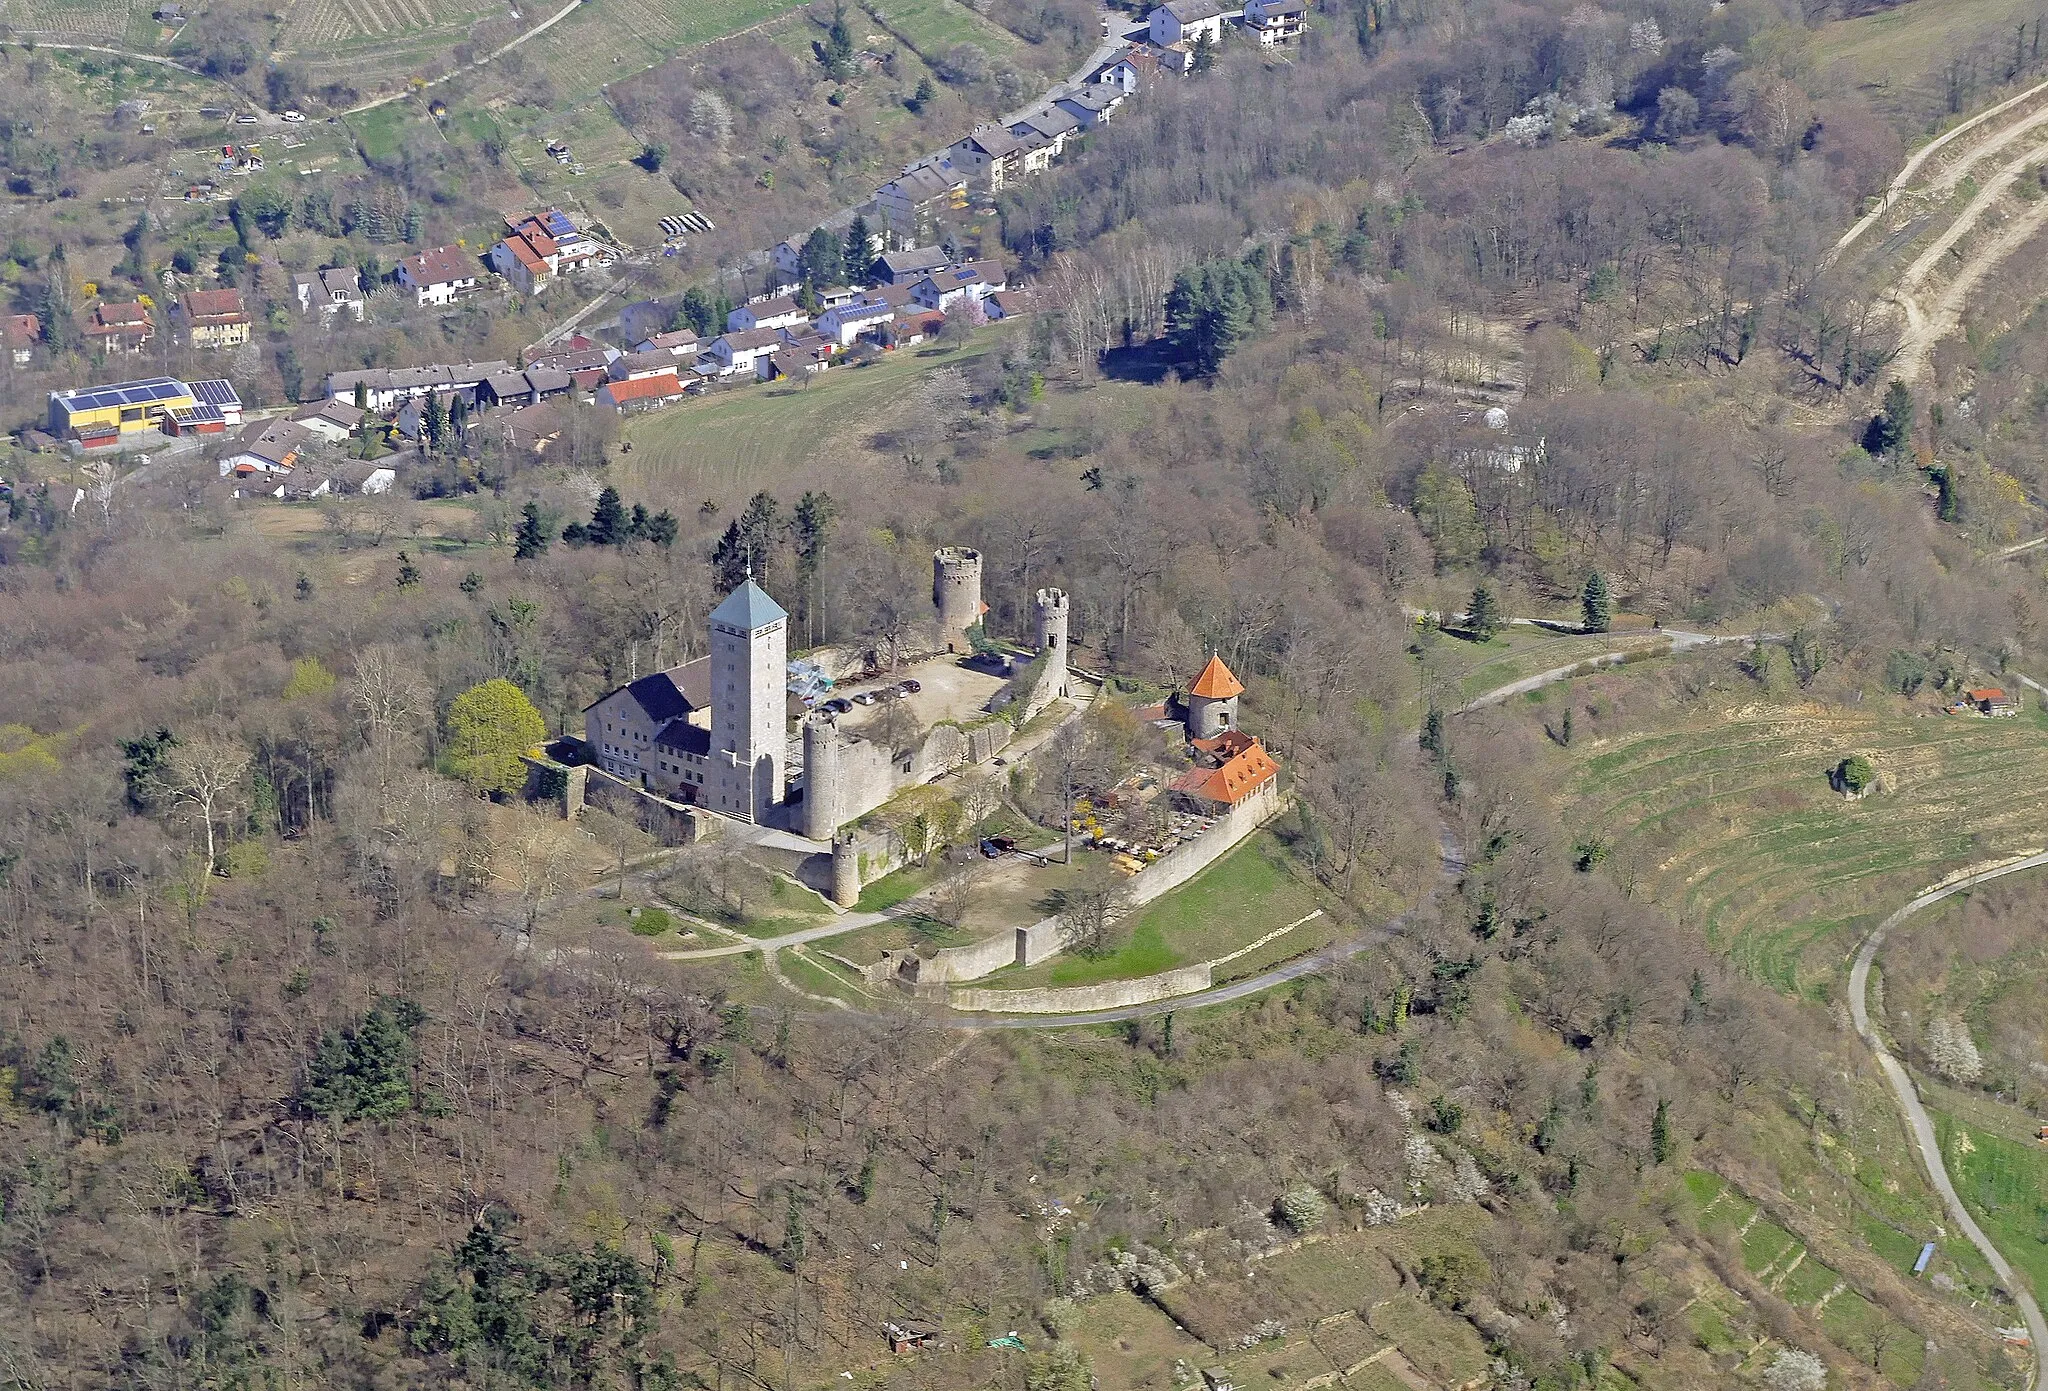 Photo showing: Aerial view of Starkenburg Castle from Heppenheim, taken from a gyrocopter at an altitude of around 2700 feet